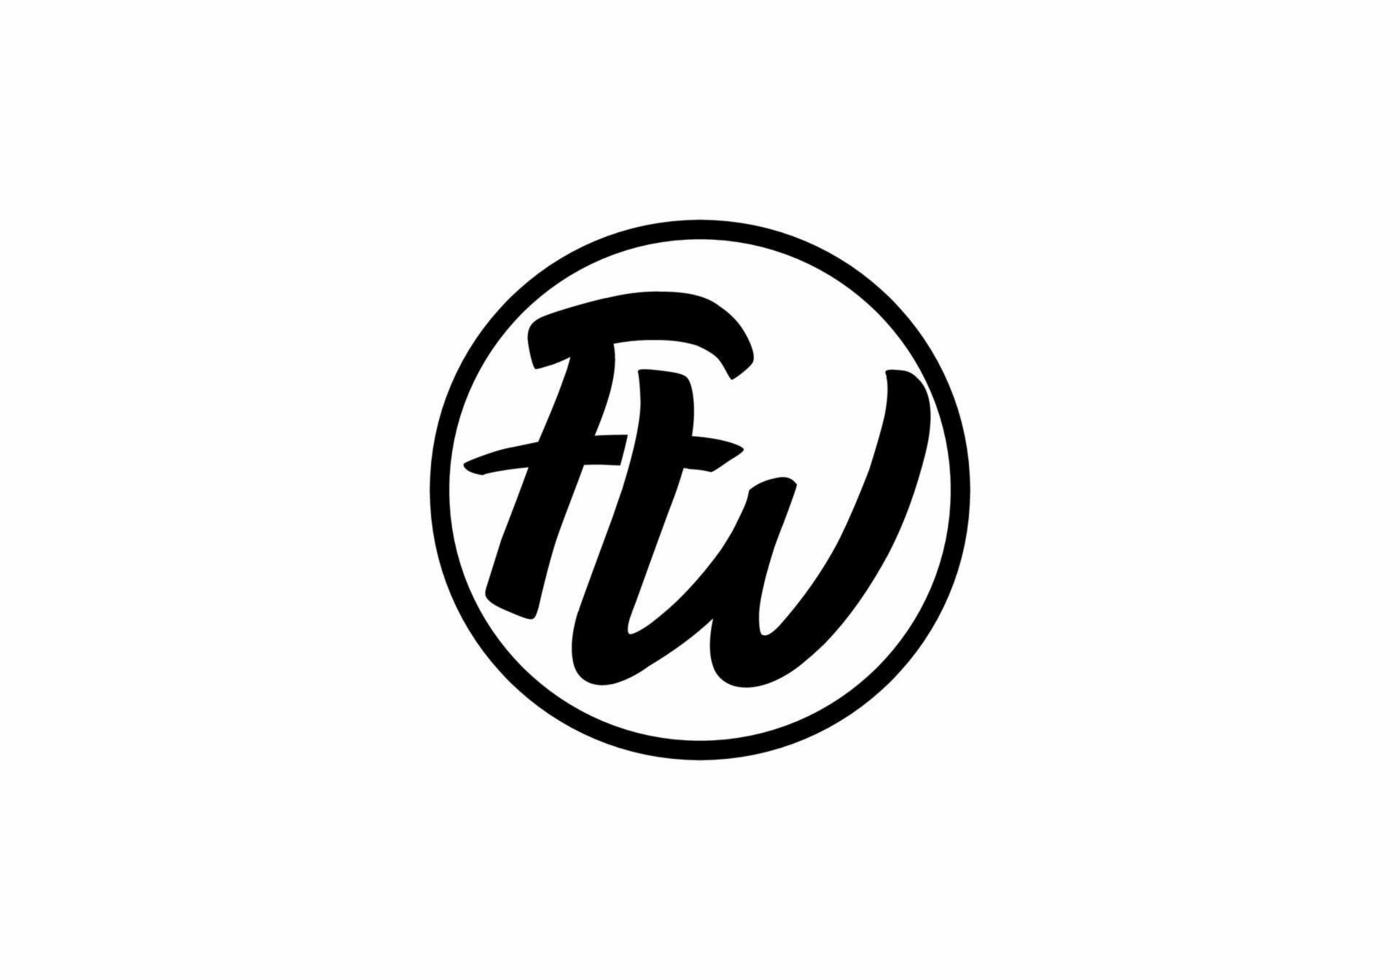 Black FW initial letter in circle logo vector